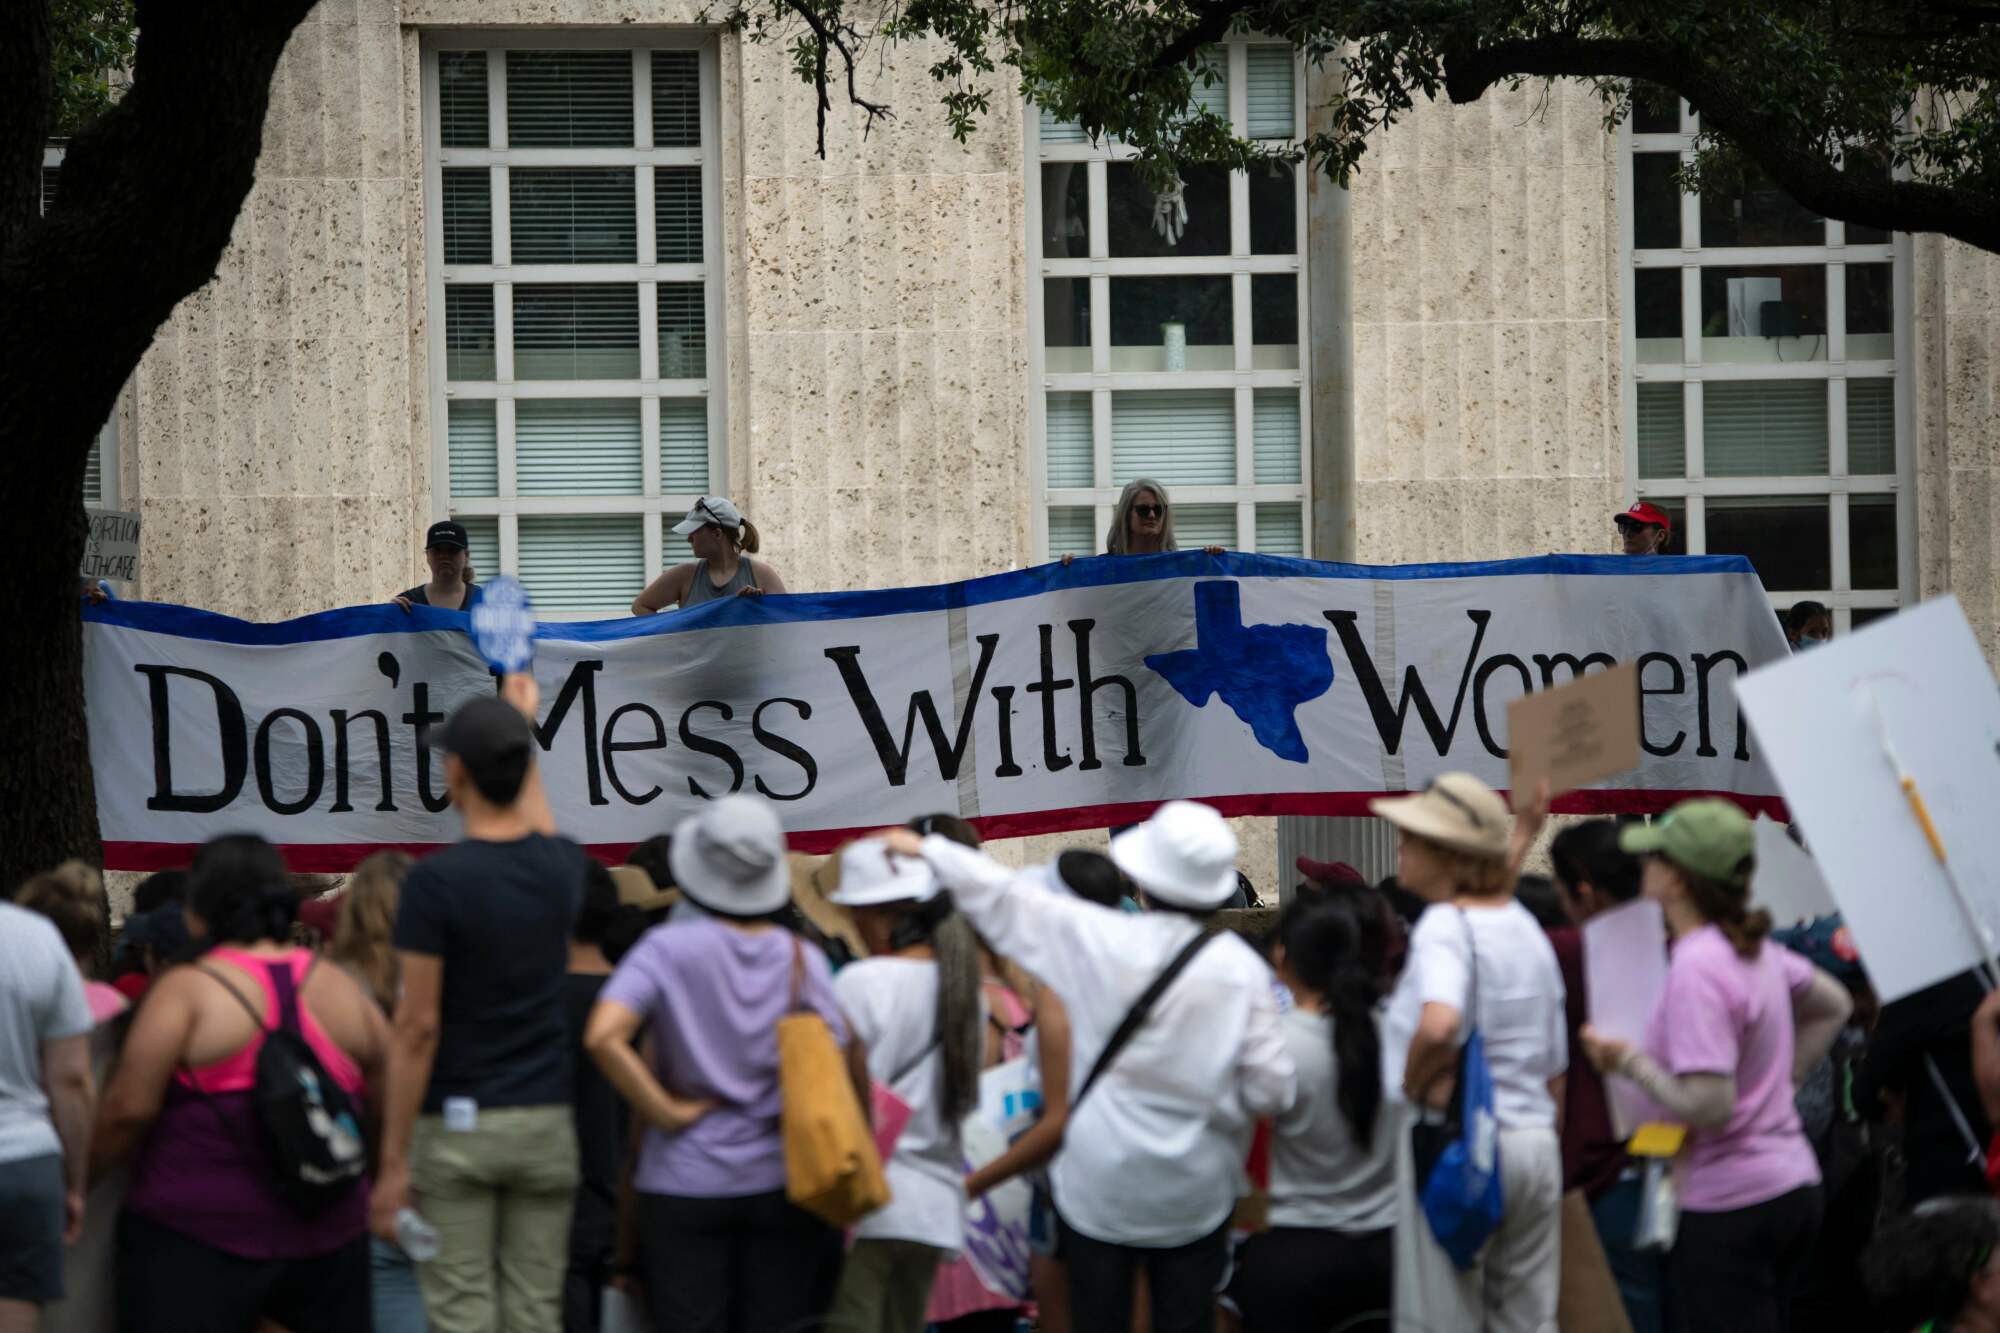 A large sign plays off of the "Don't Mess with Texas" motto, which reads "Don't mess with women".